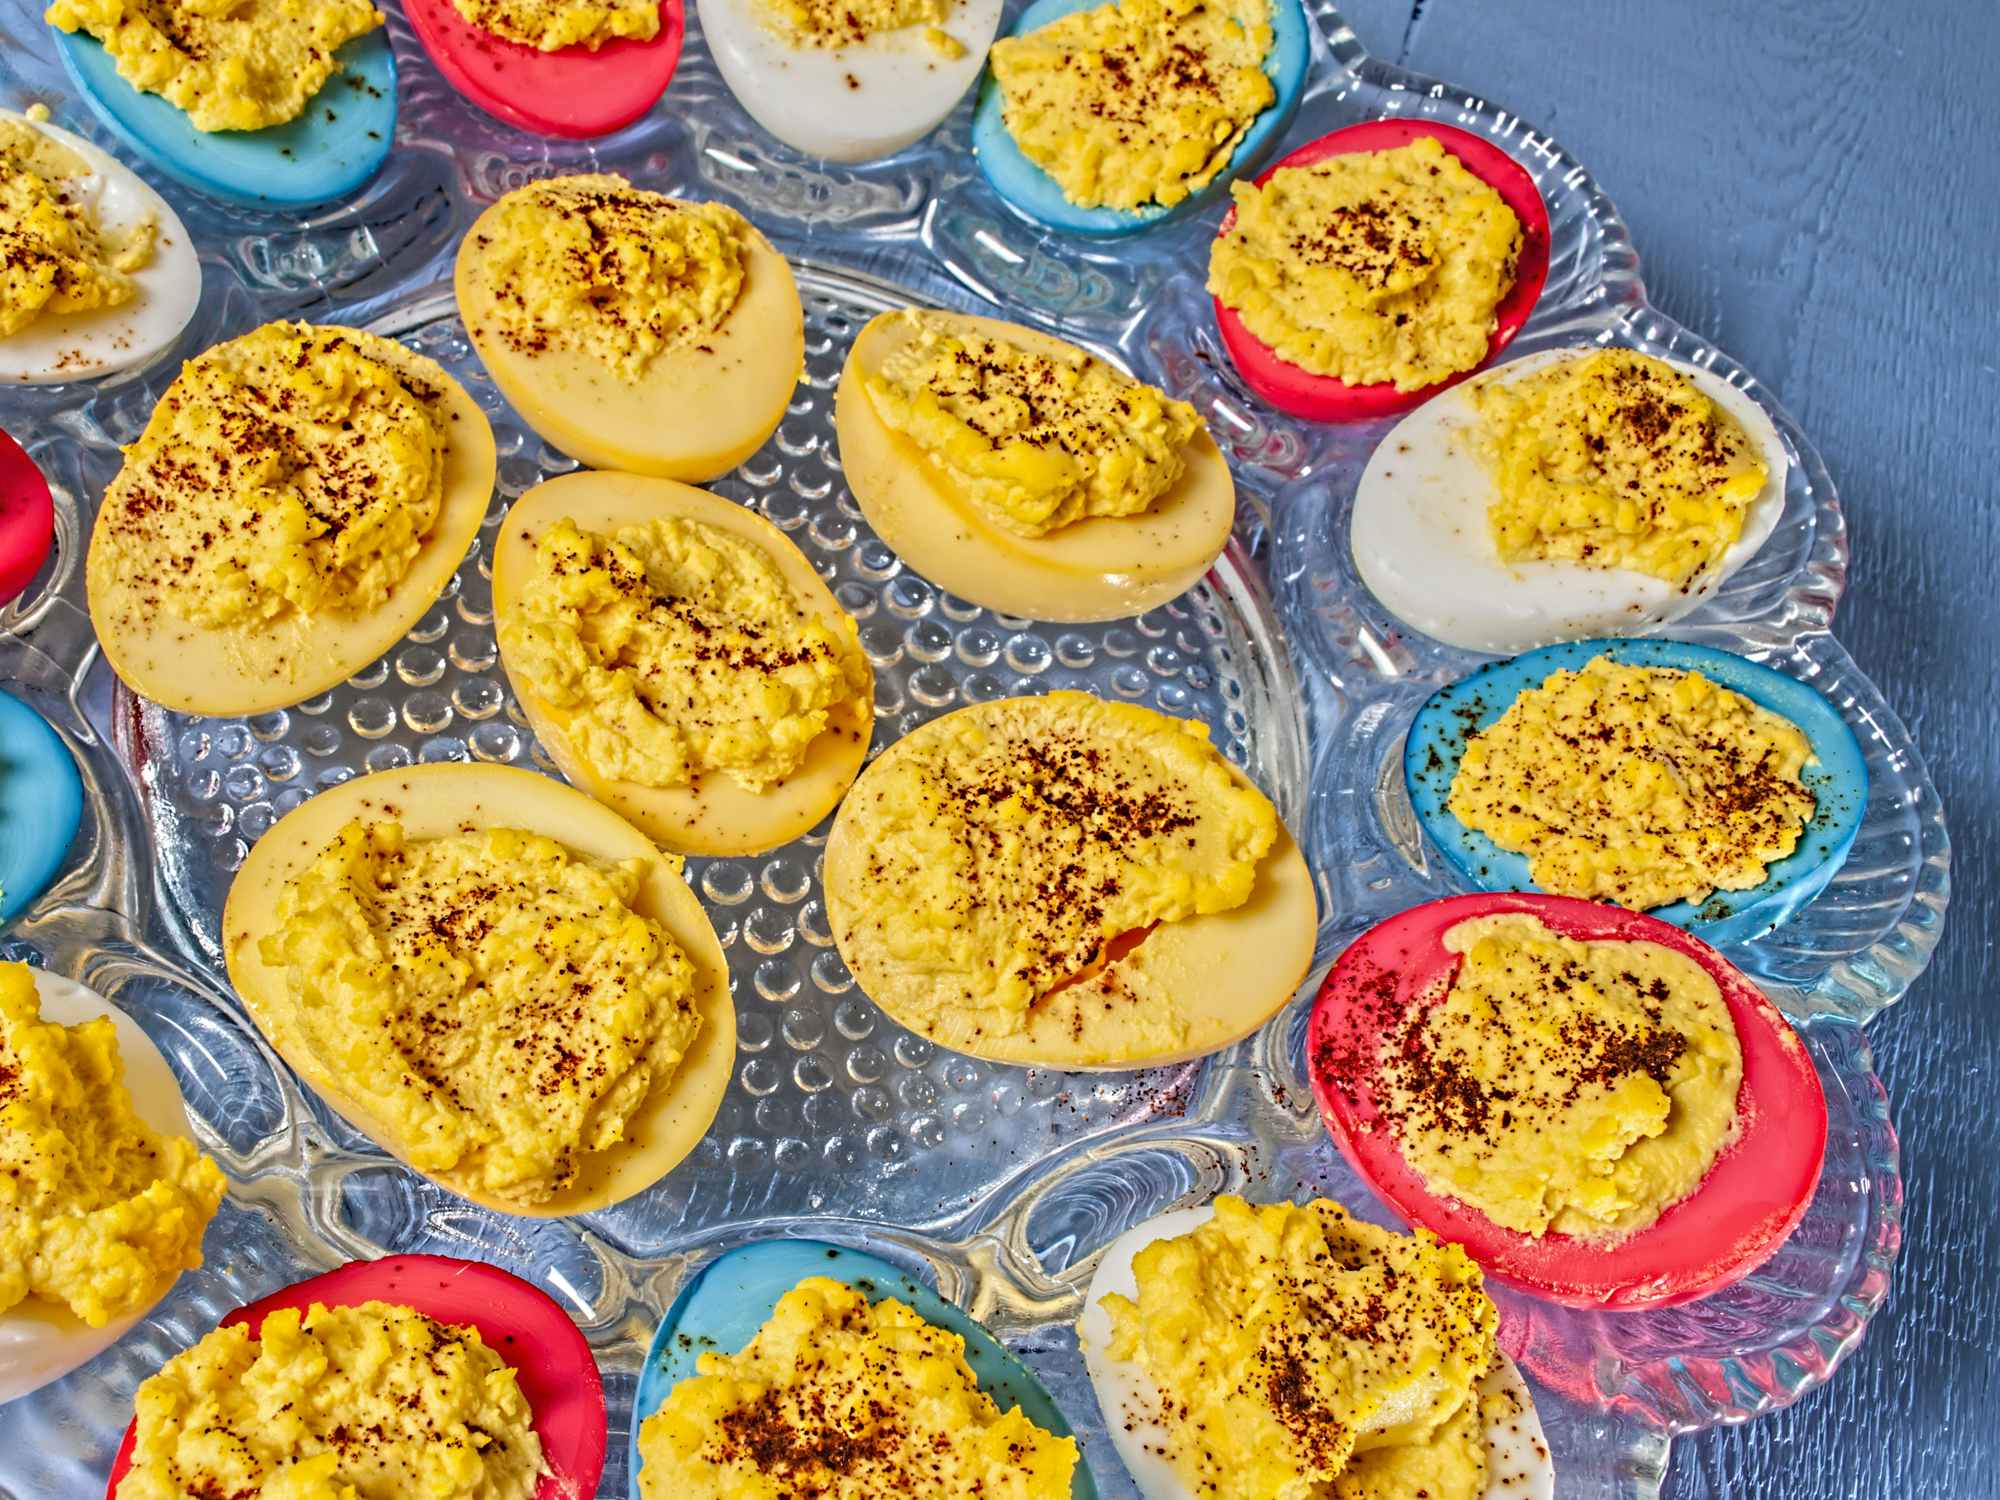 A platter of red white and blue dyed deviled eggs